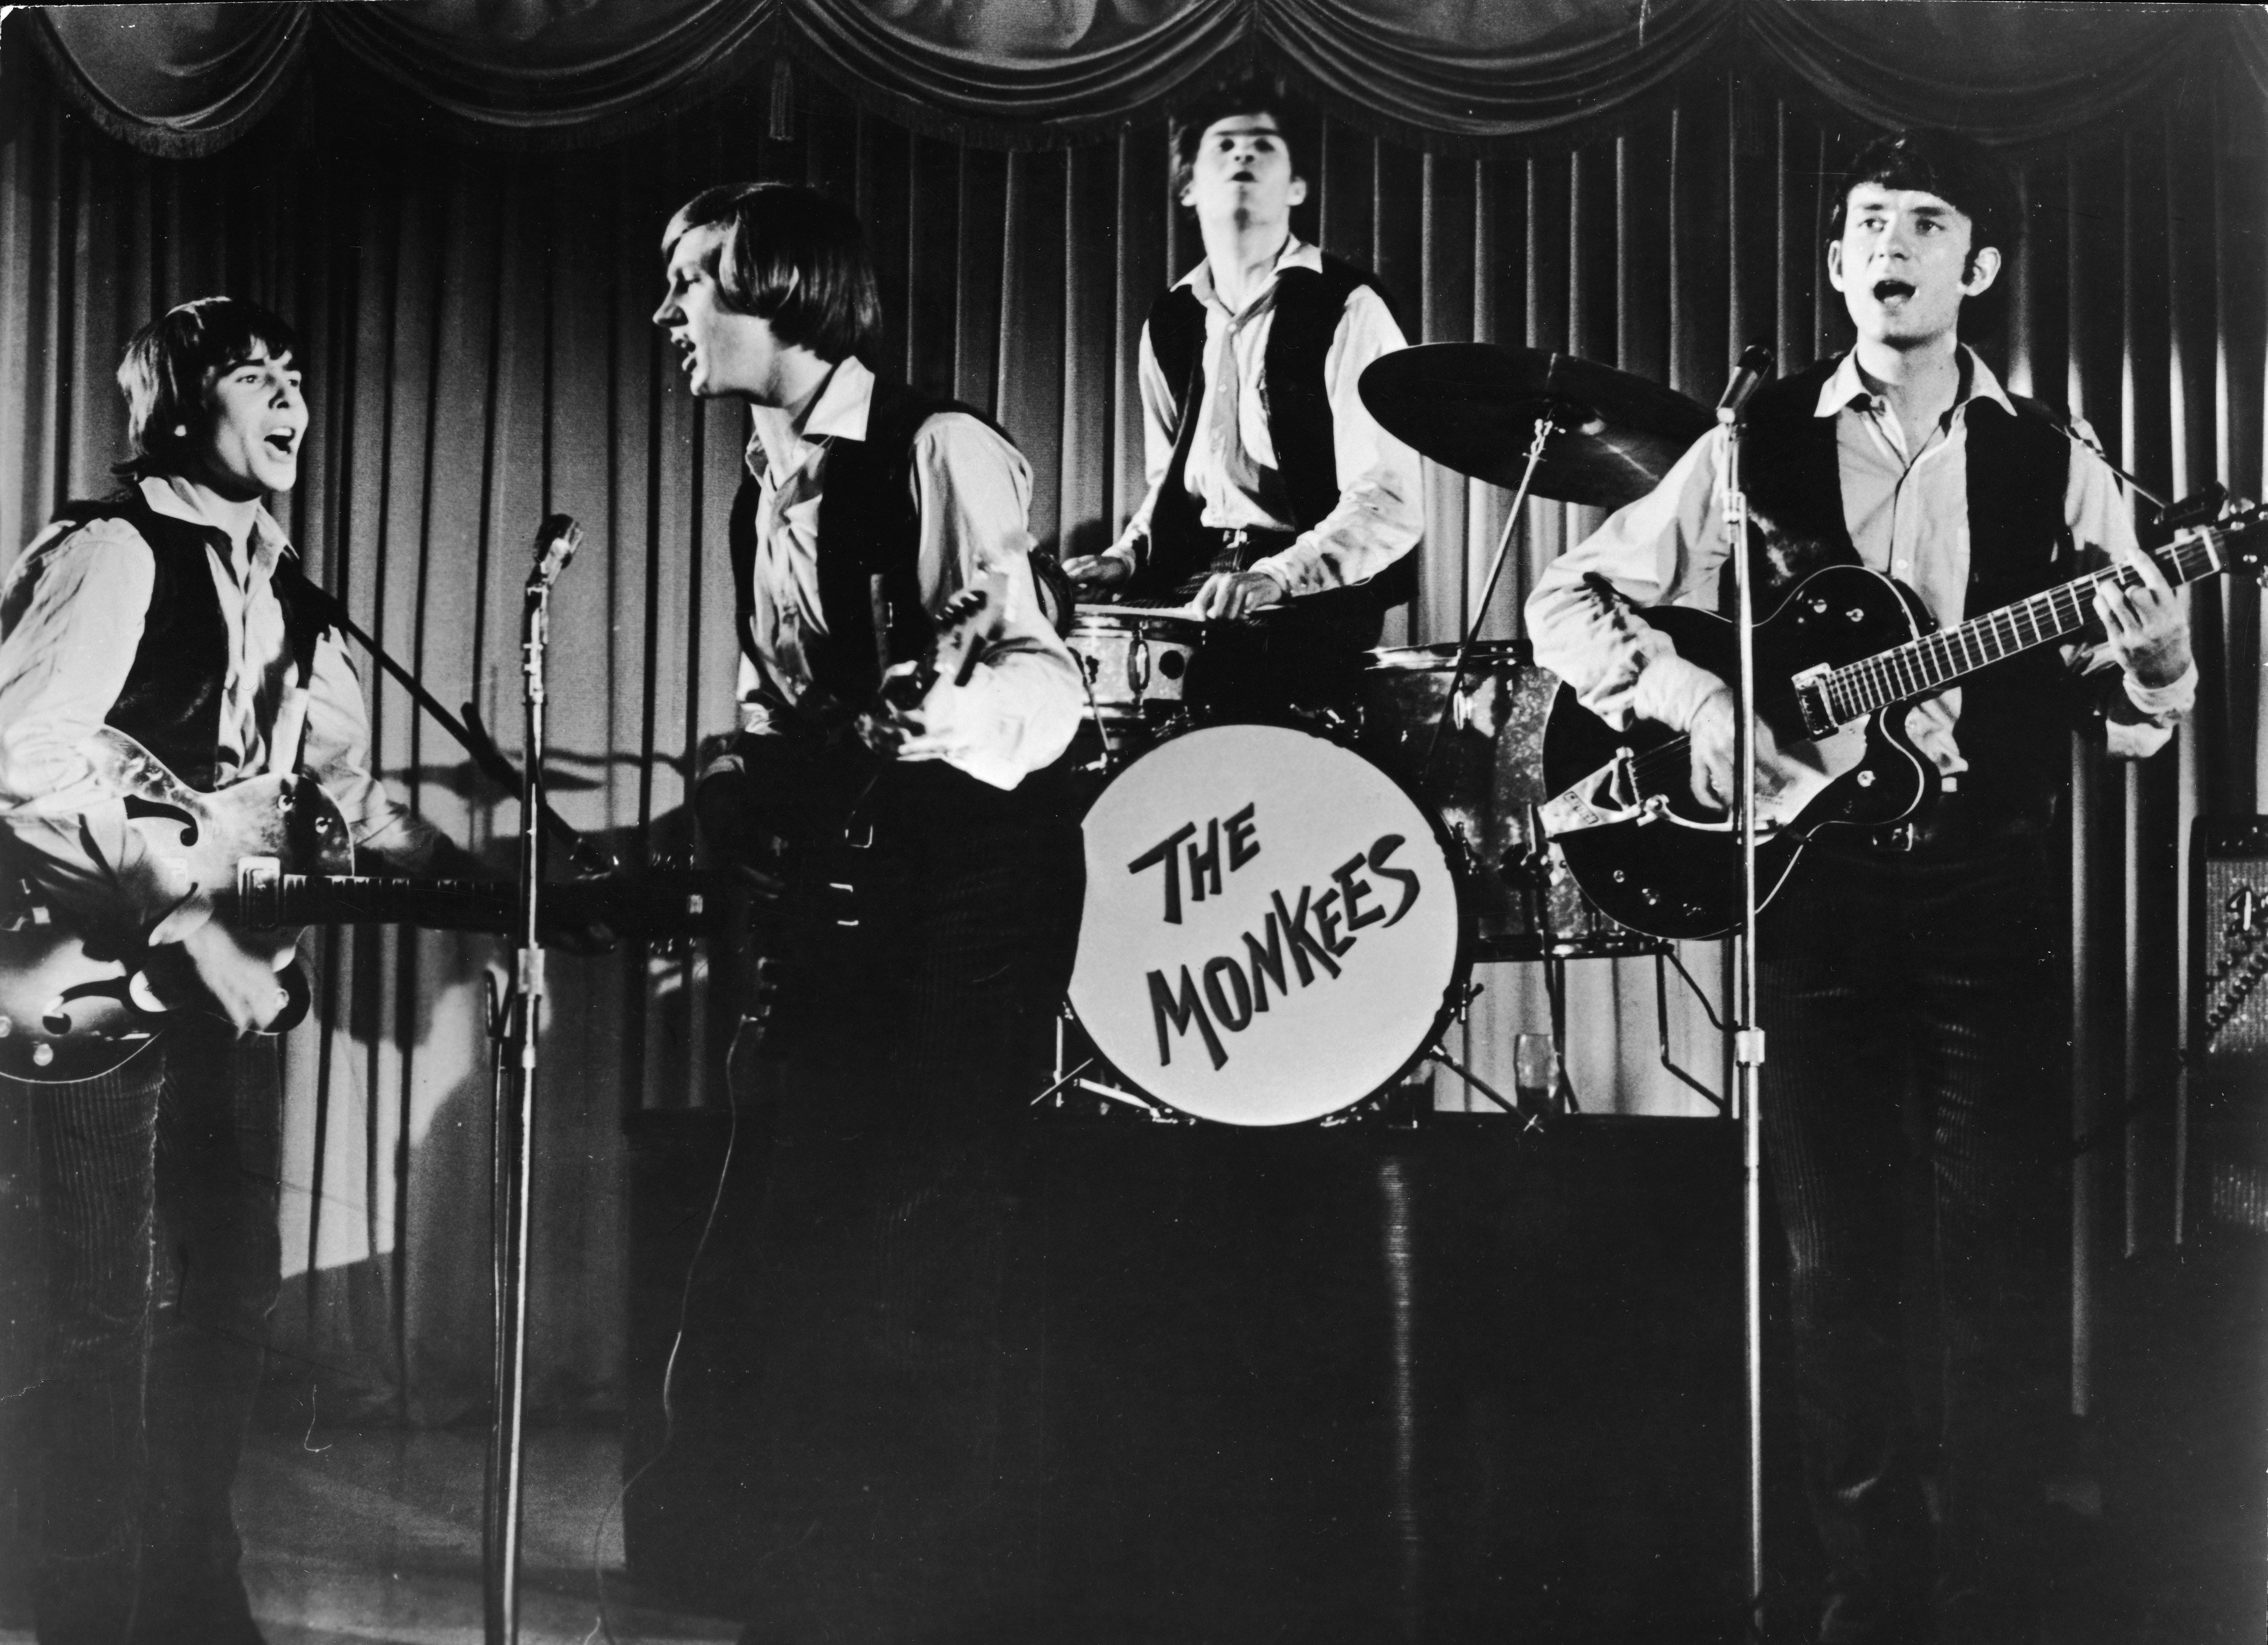 The Monkees' Davy Jones, Peter Tork, Micky Dolenz, and Michael Nesmith in black-and-white